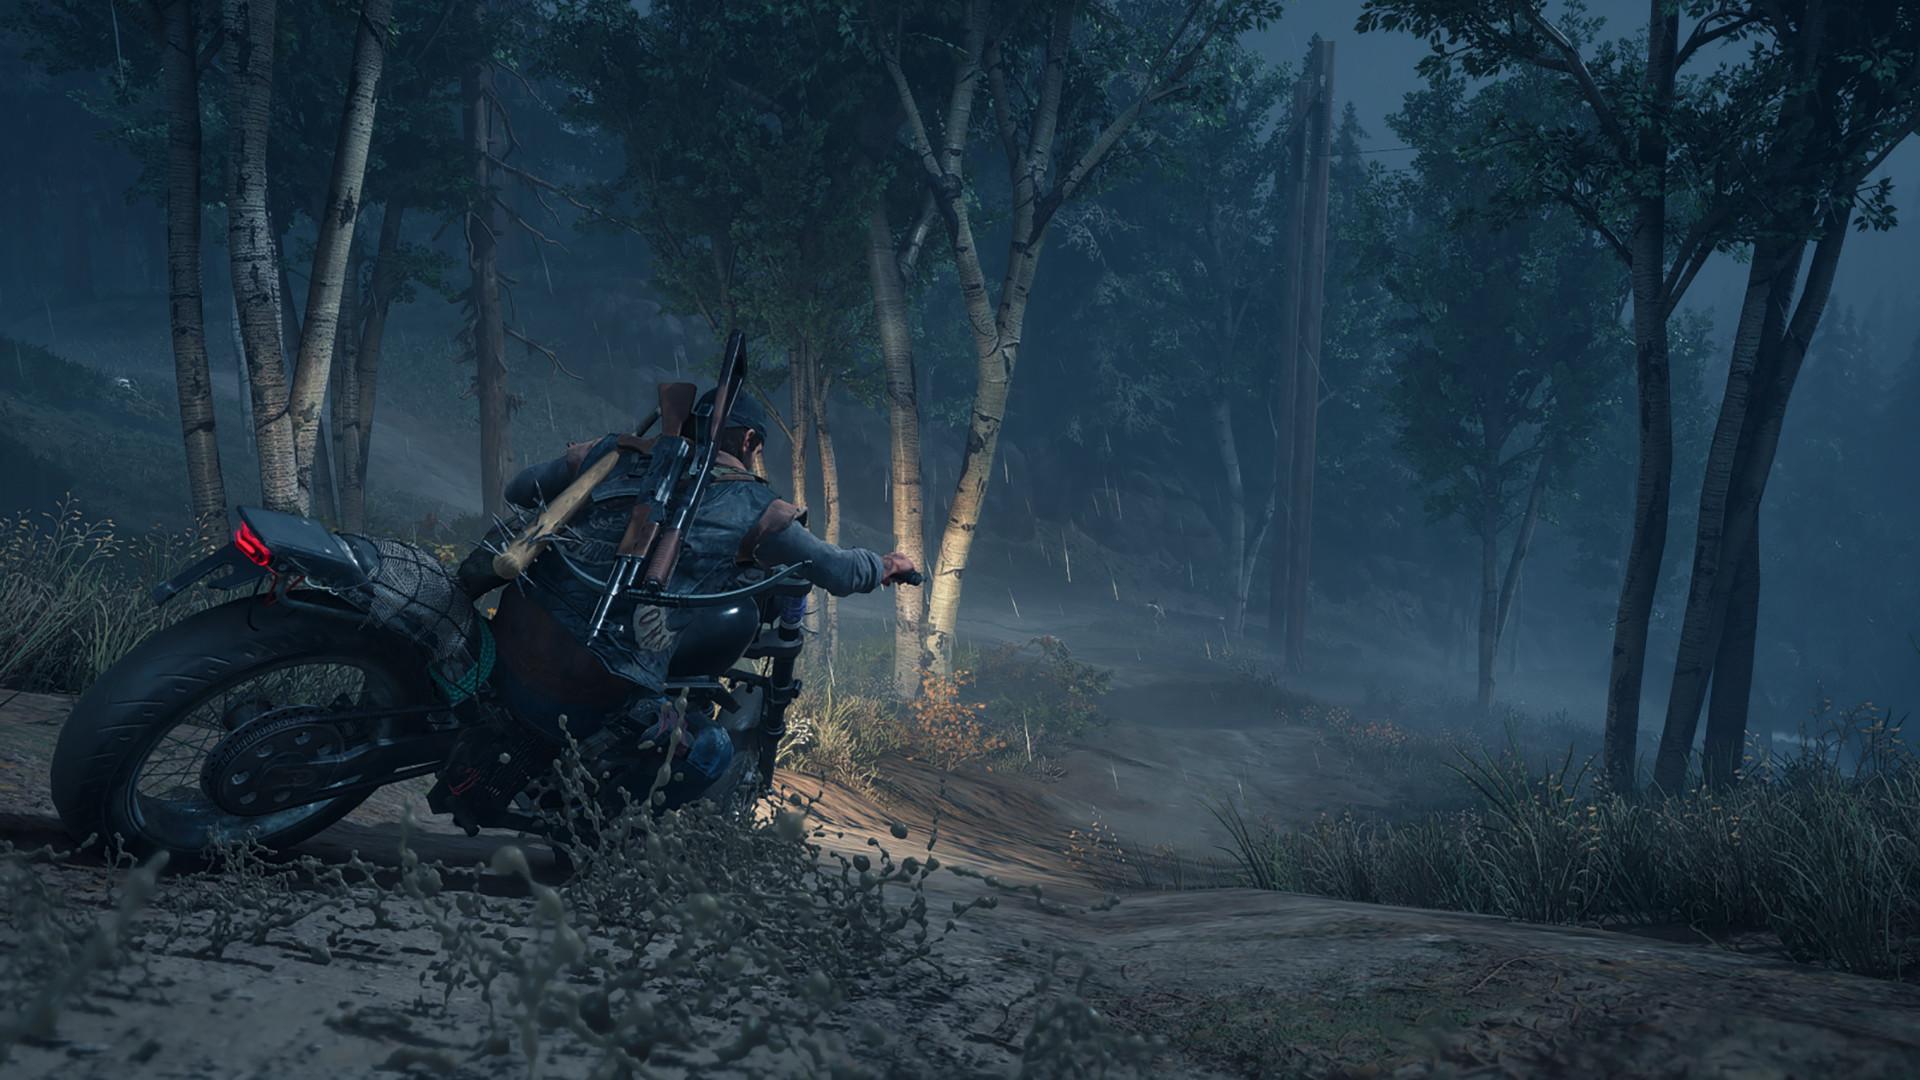 Screenshot №11 from game Days Gone